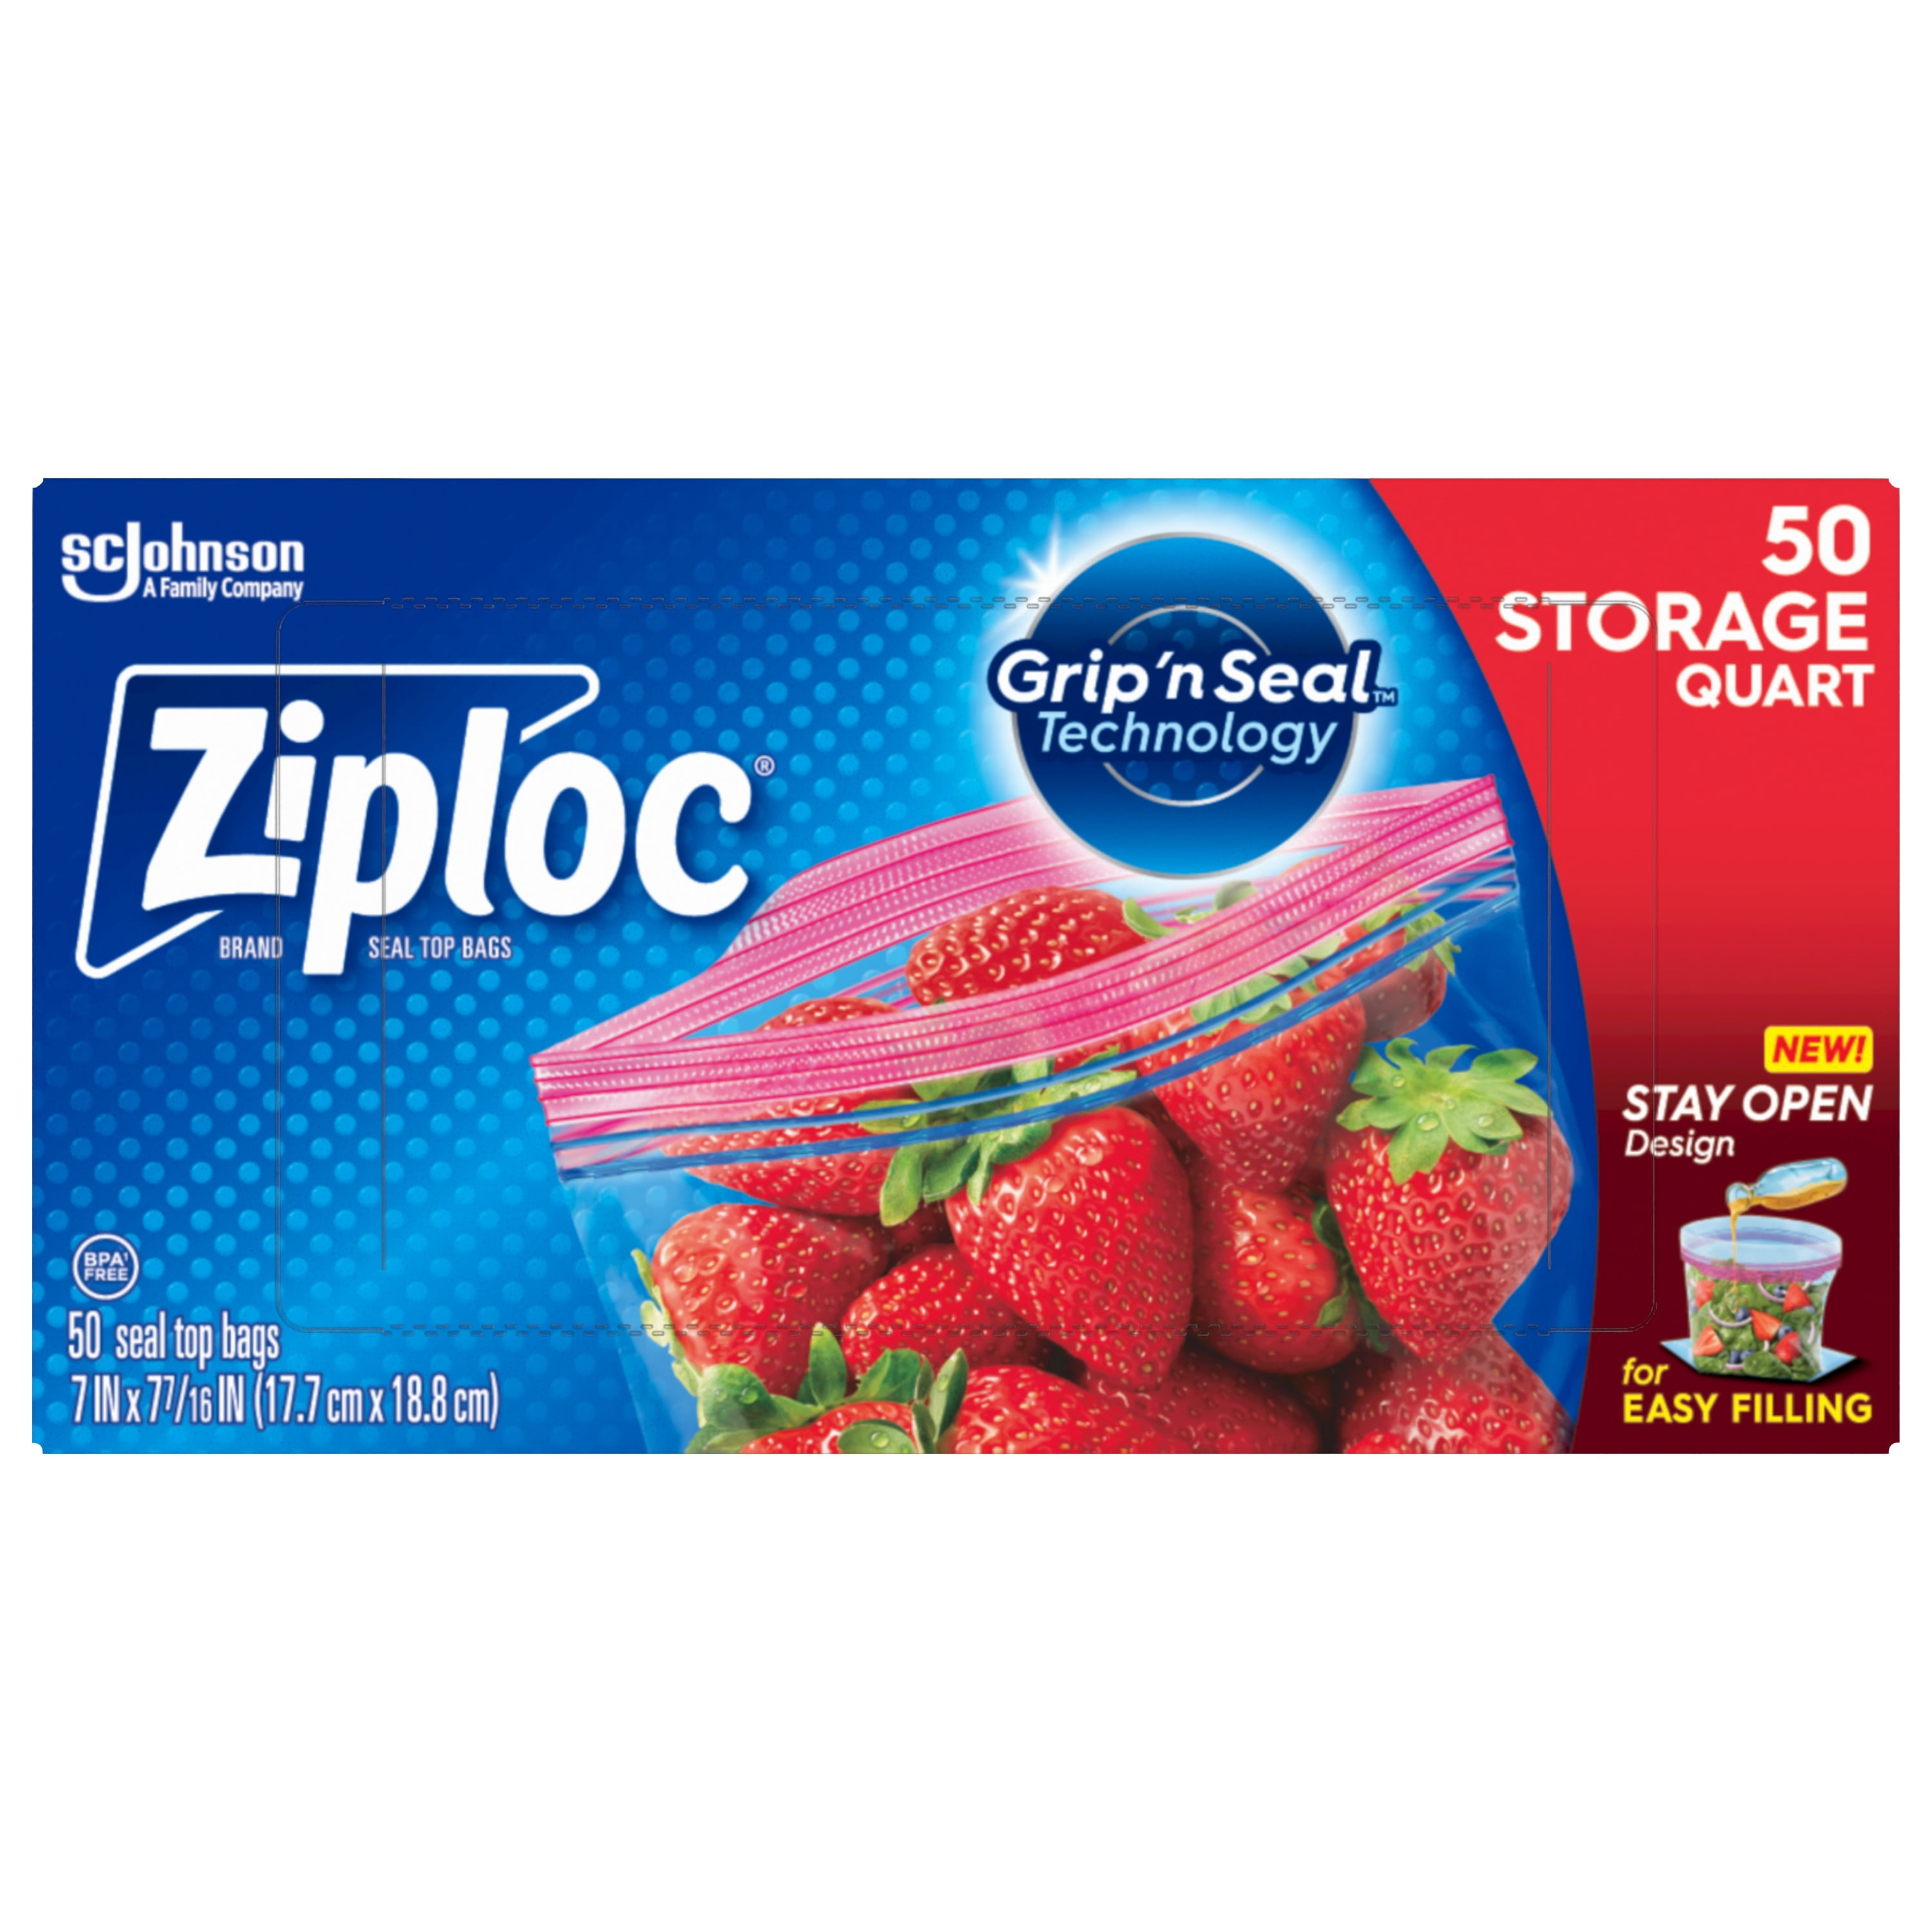 Ziploc Food Storage and Sandwich Bags Variety Pack, New Stay Open Design  with Stand-Up Bottom, Easy to Fill, 166 Bags Total